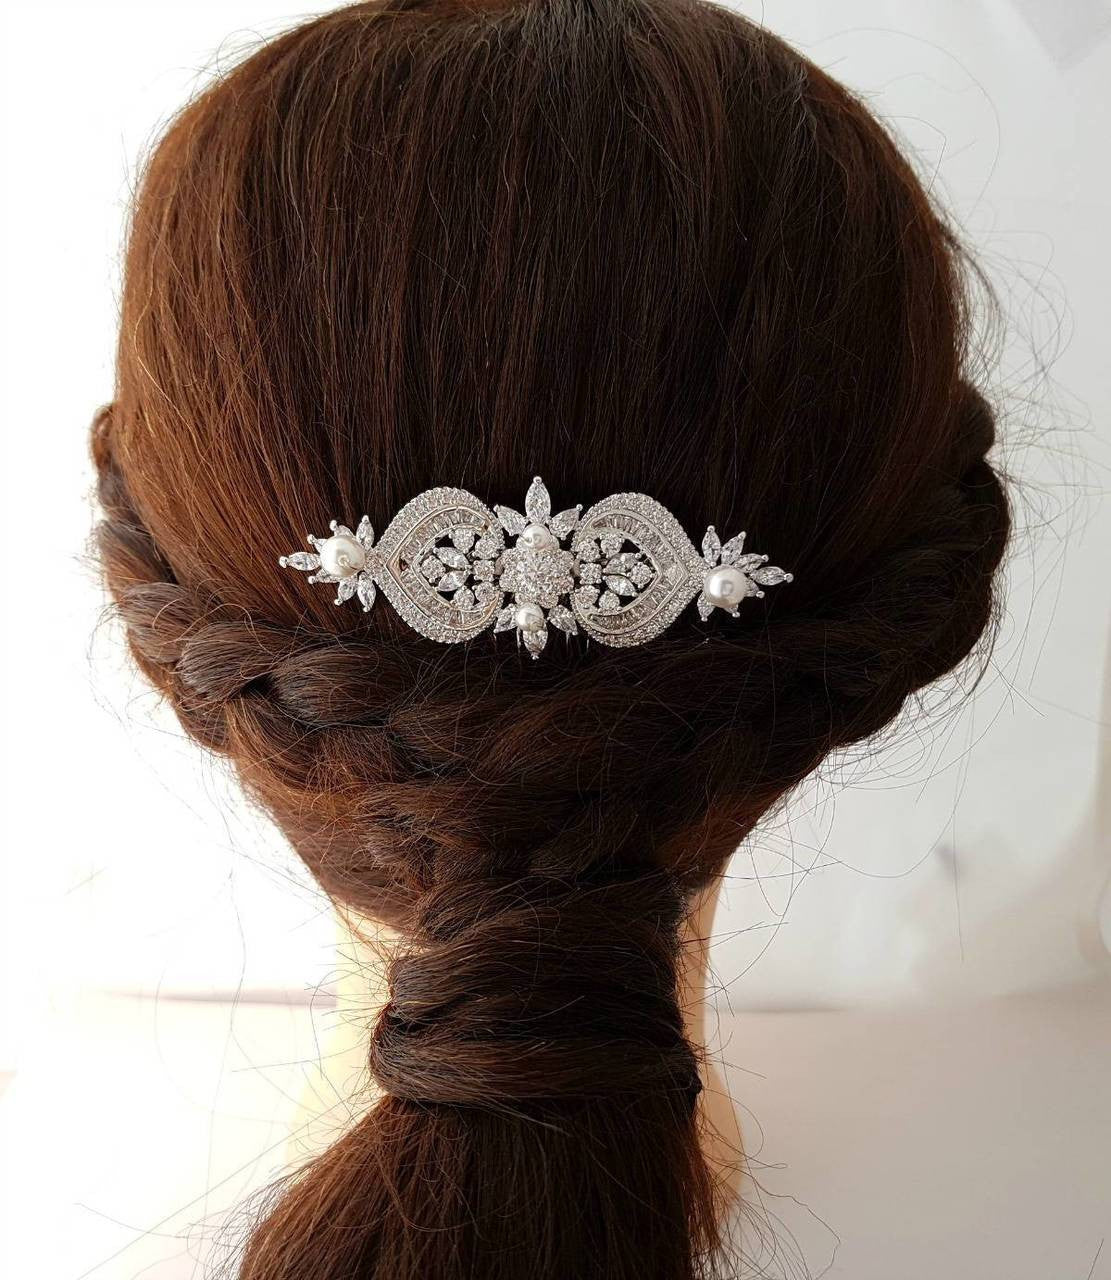 Gold Hair Comb, Wedding Hair Comb, Pearl Bridal Hair Piece, Crystal Rose Gold Headpiece,  Pearls, Bride Hair Jewelry, Rosa